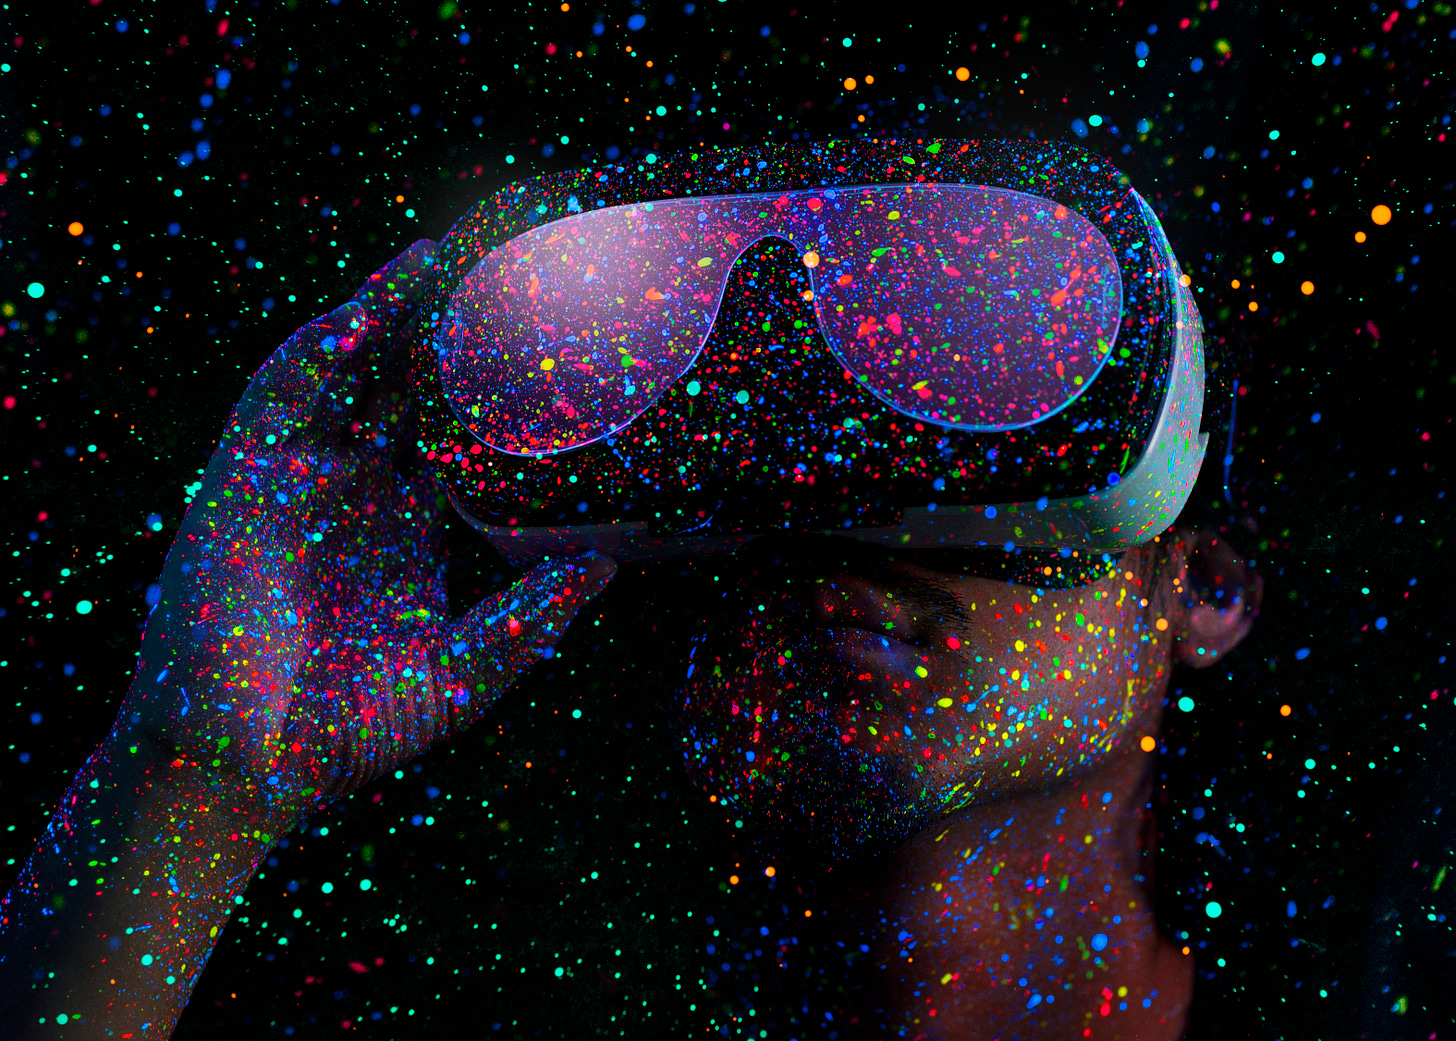 Someone wearing a Virtual Reality headset in a stylized space-field of dayglo splotches. Almost looks like floating paint flecks